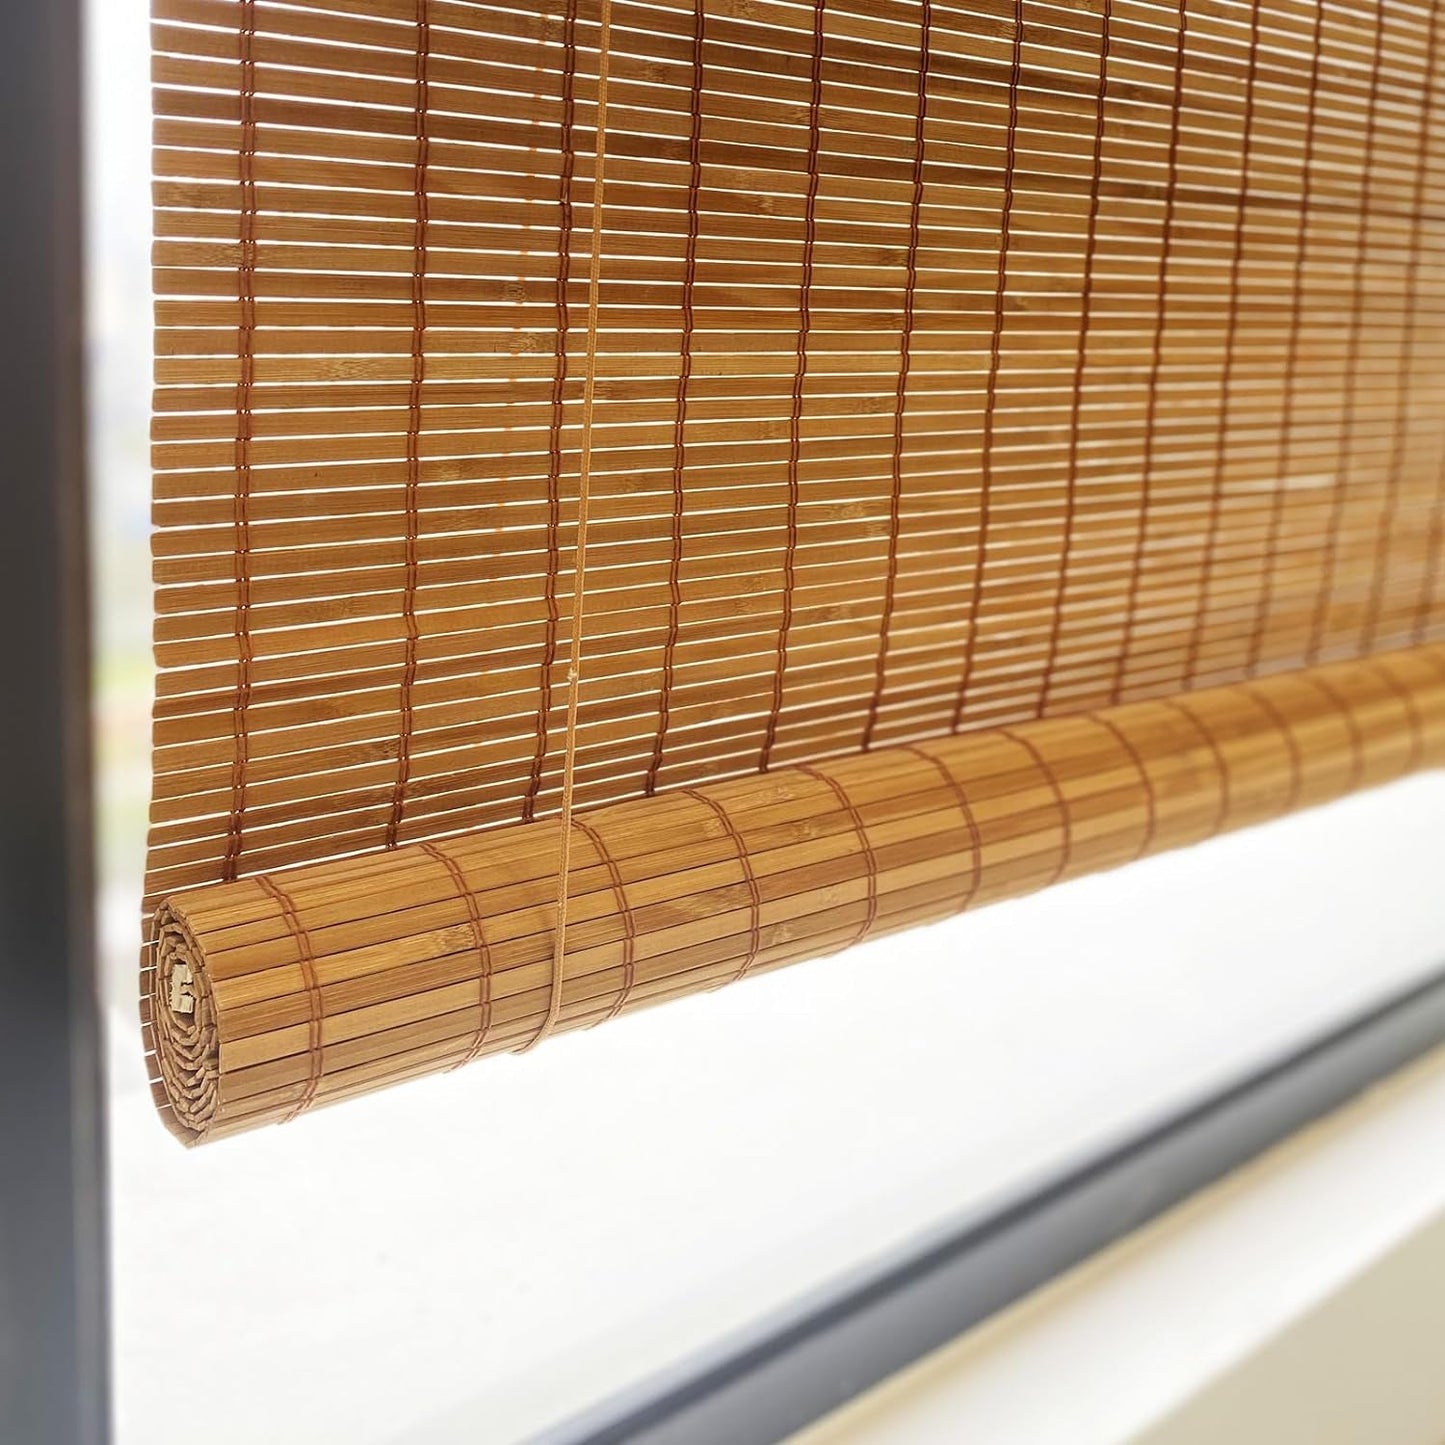 Bamboo Blinds, 34" W X 60" H Roman Window Shades for Home Office Hotel, Roll up Blinds and Shades for Patio Indoor Outdoor Porch